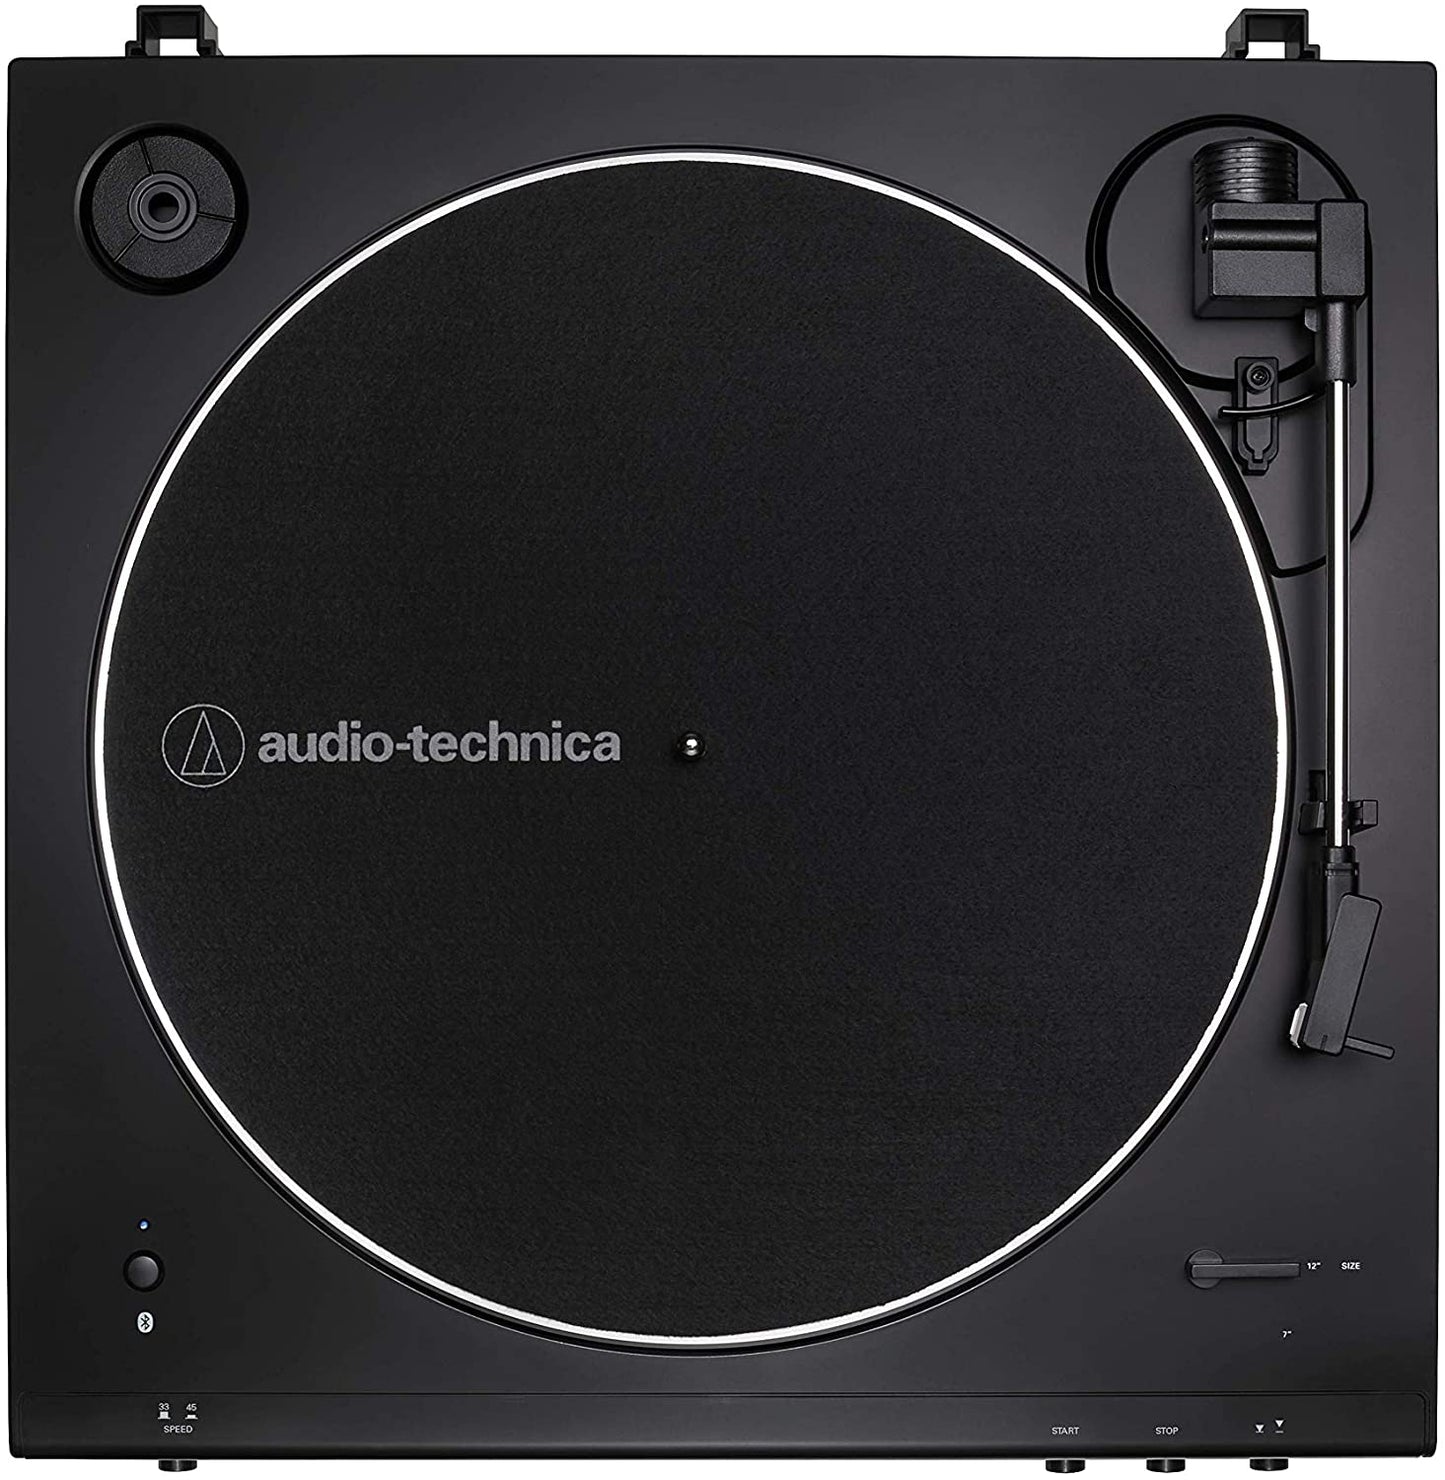 Audio-Technica AT-LP60XBT Bluetooth Stereo Turntable